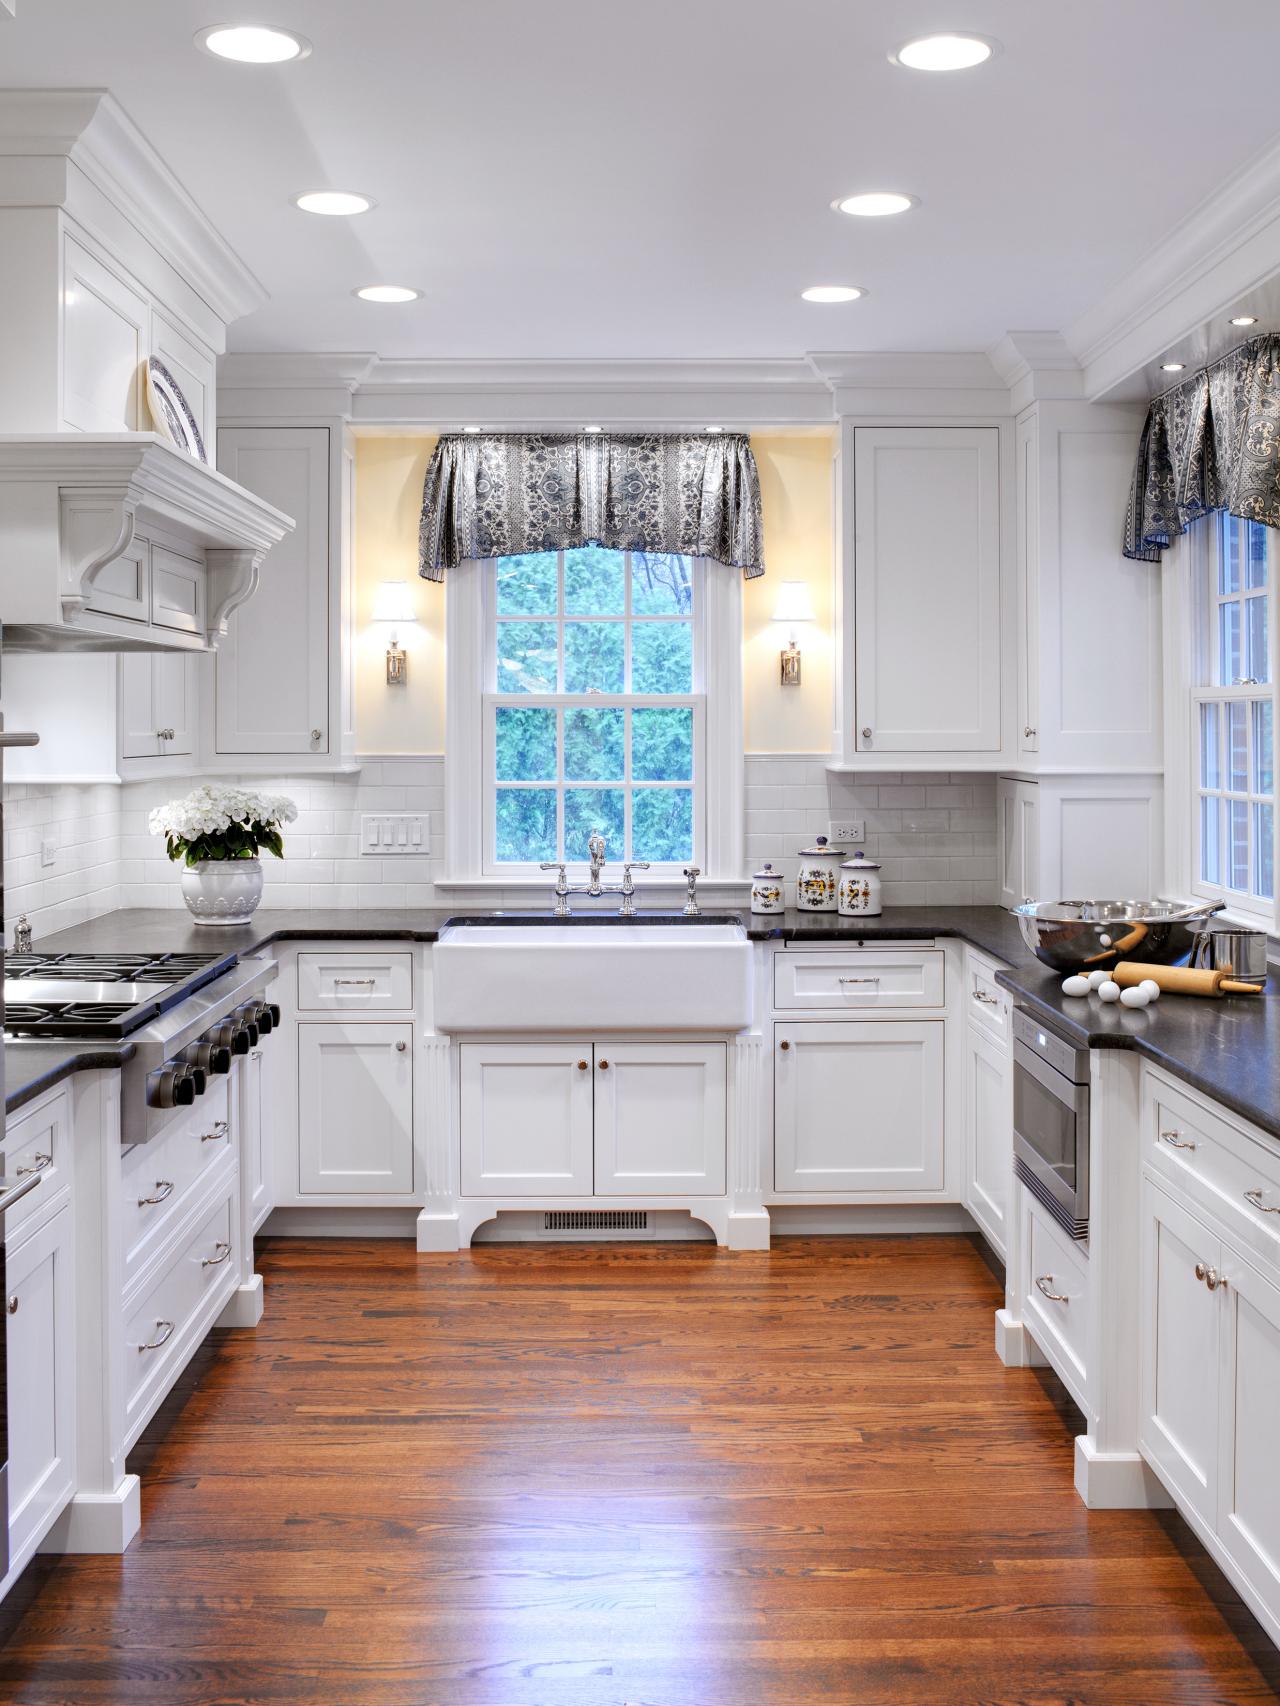 cottage kitchen kitchens country designs style farmhouse beautiful traditional sink cabinets hgtv room modern dark look shaped multi over floors